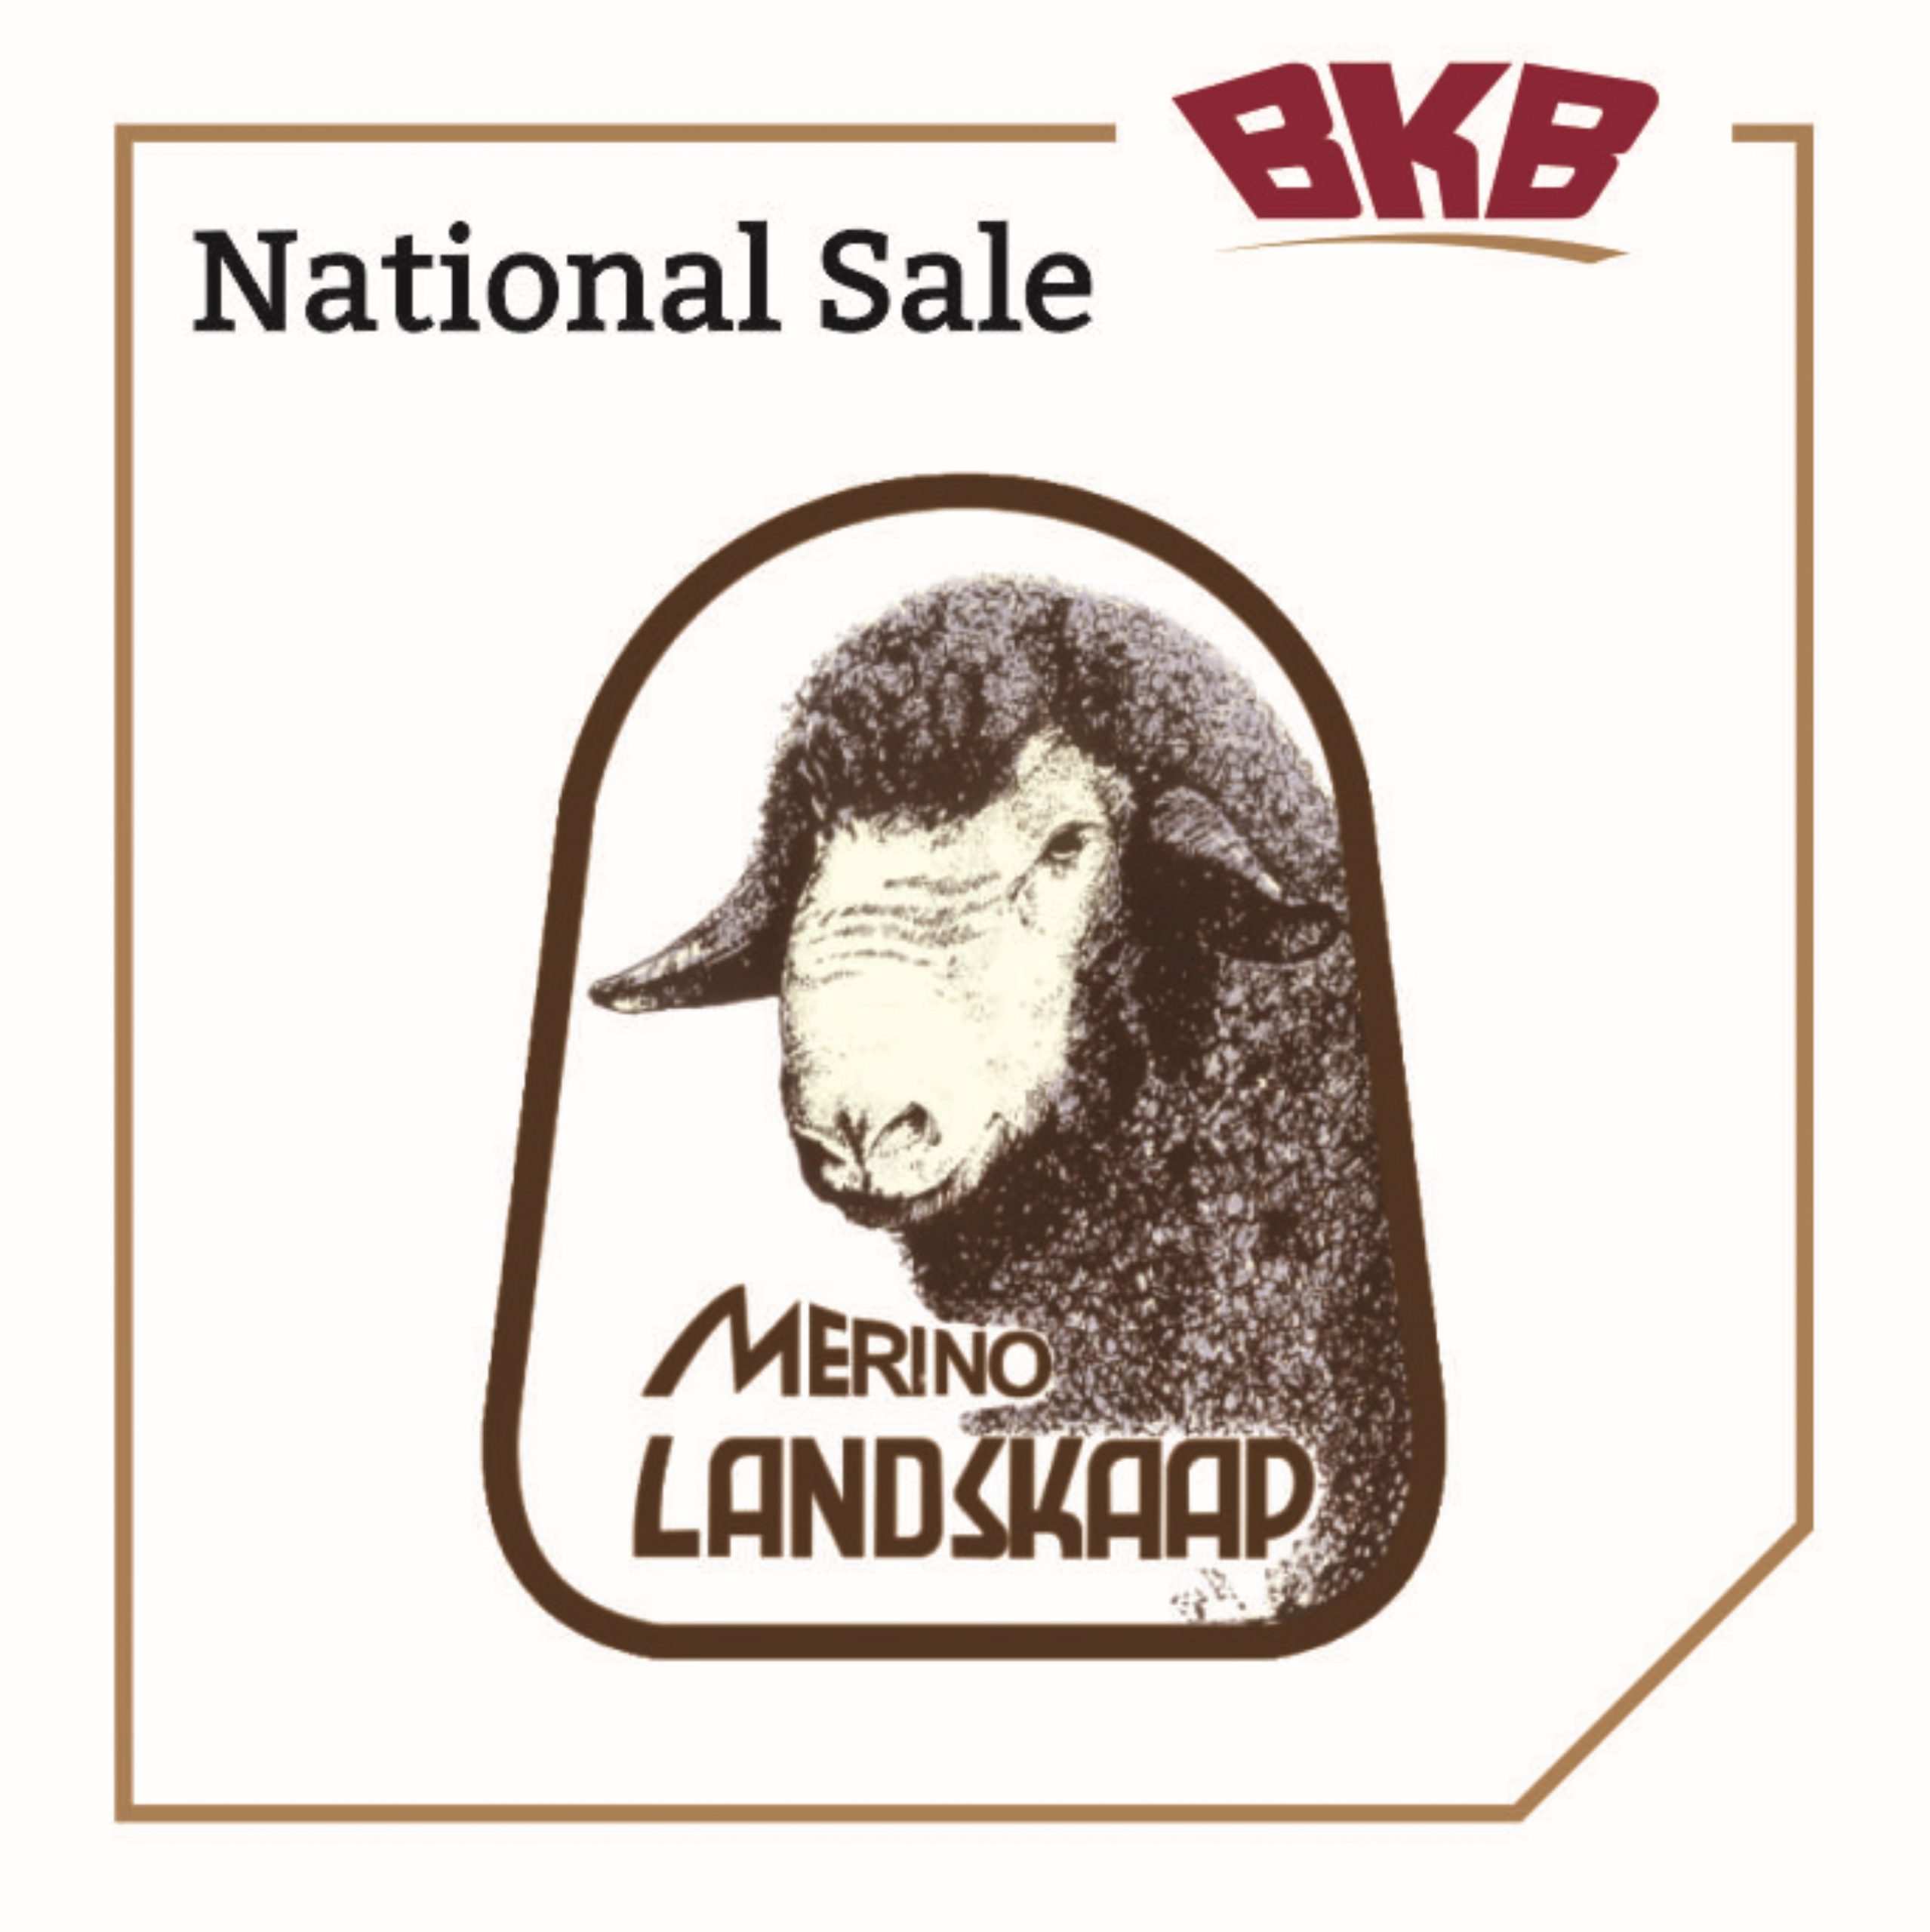 MERINO LANDSHEEP NATIONAL AUCTION | BKB Events - For all agricultural events and auctions